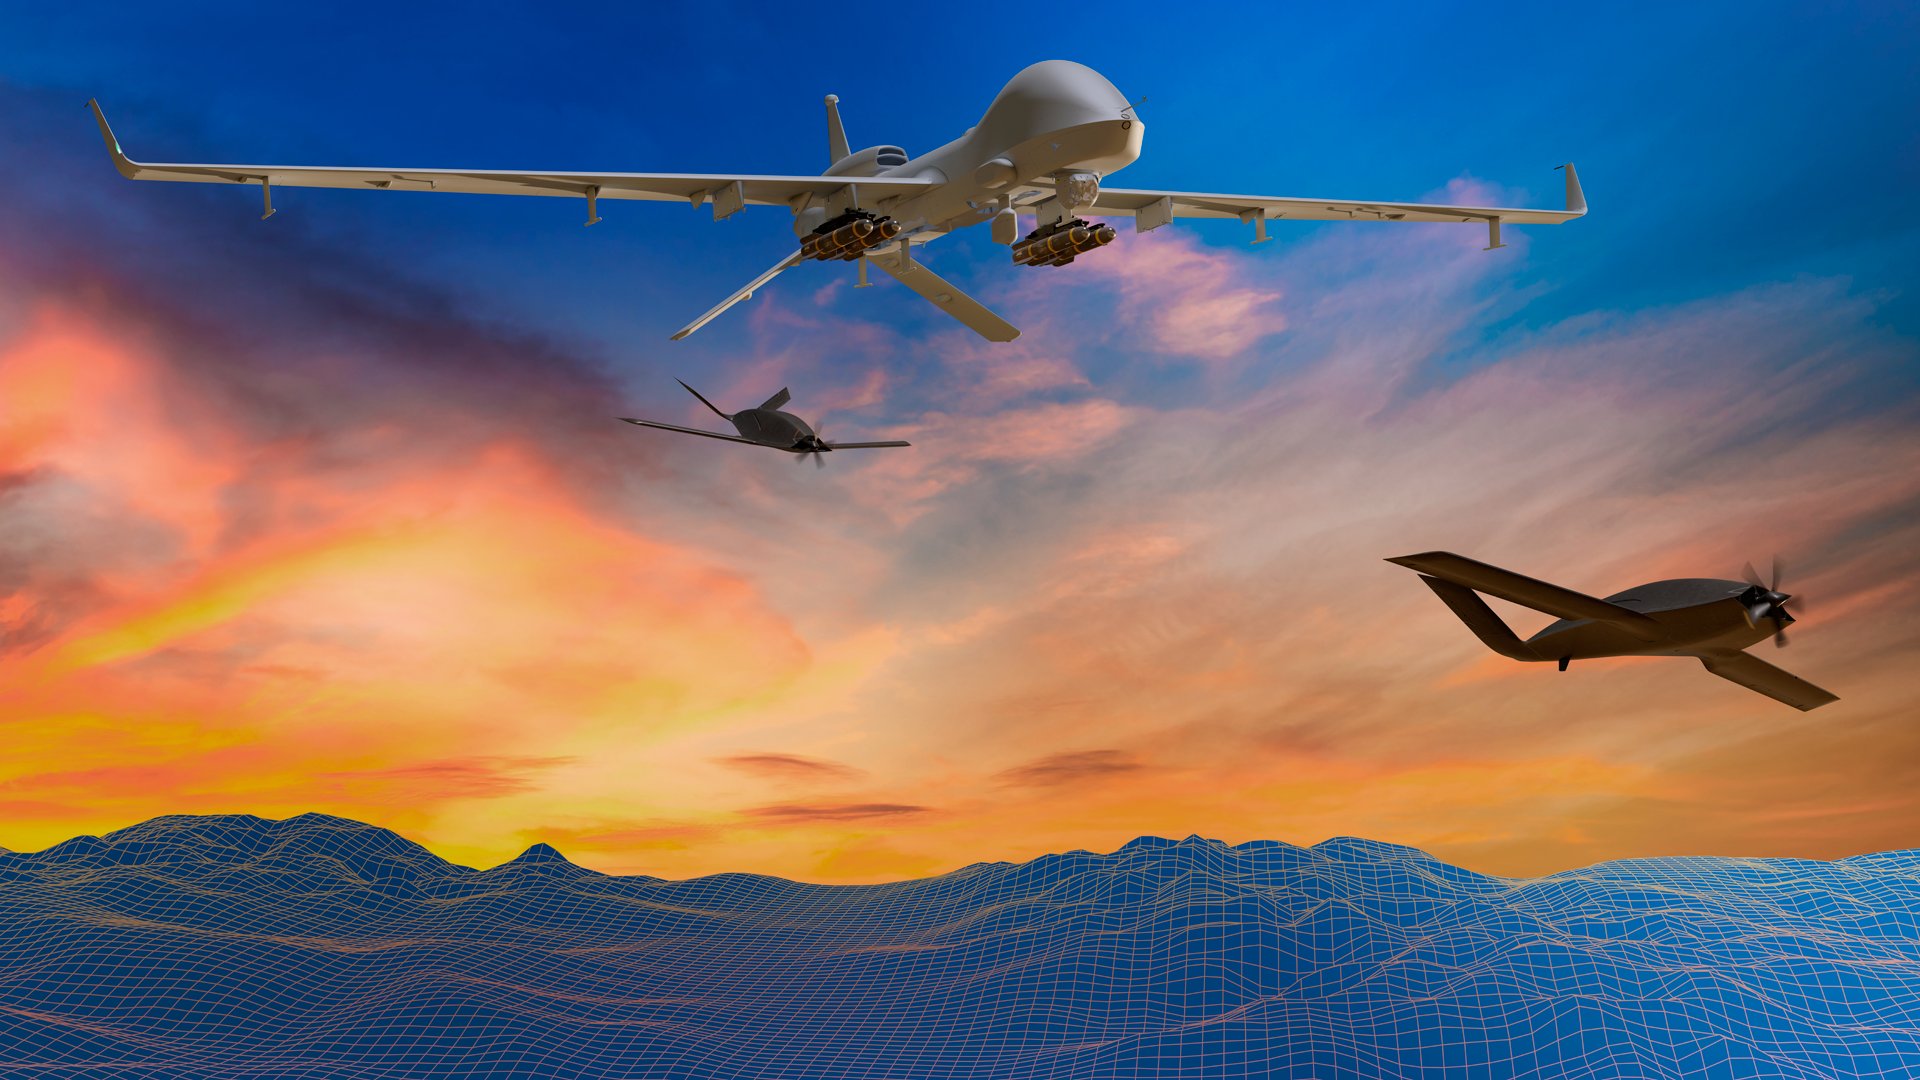 Artist impression of an Eaglet drone being launched from an MQ-1C Gray Eagle Extended Range UAS